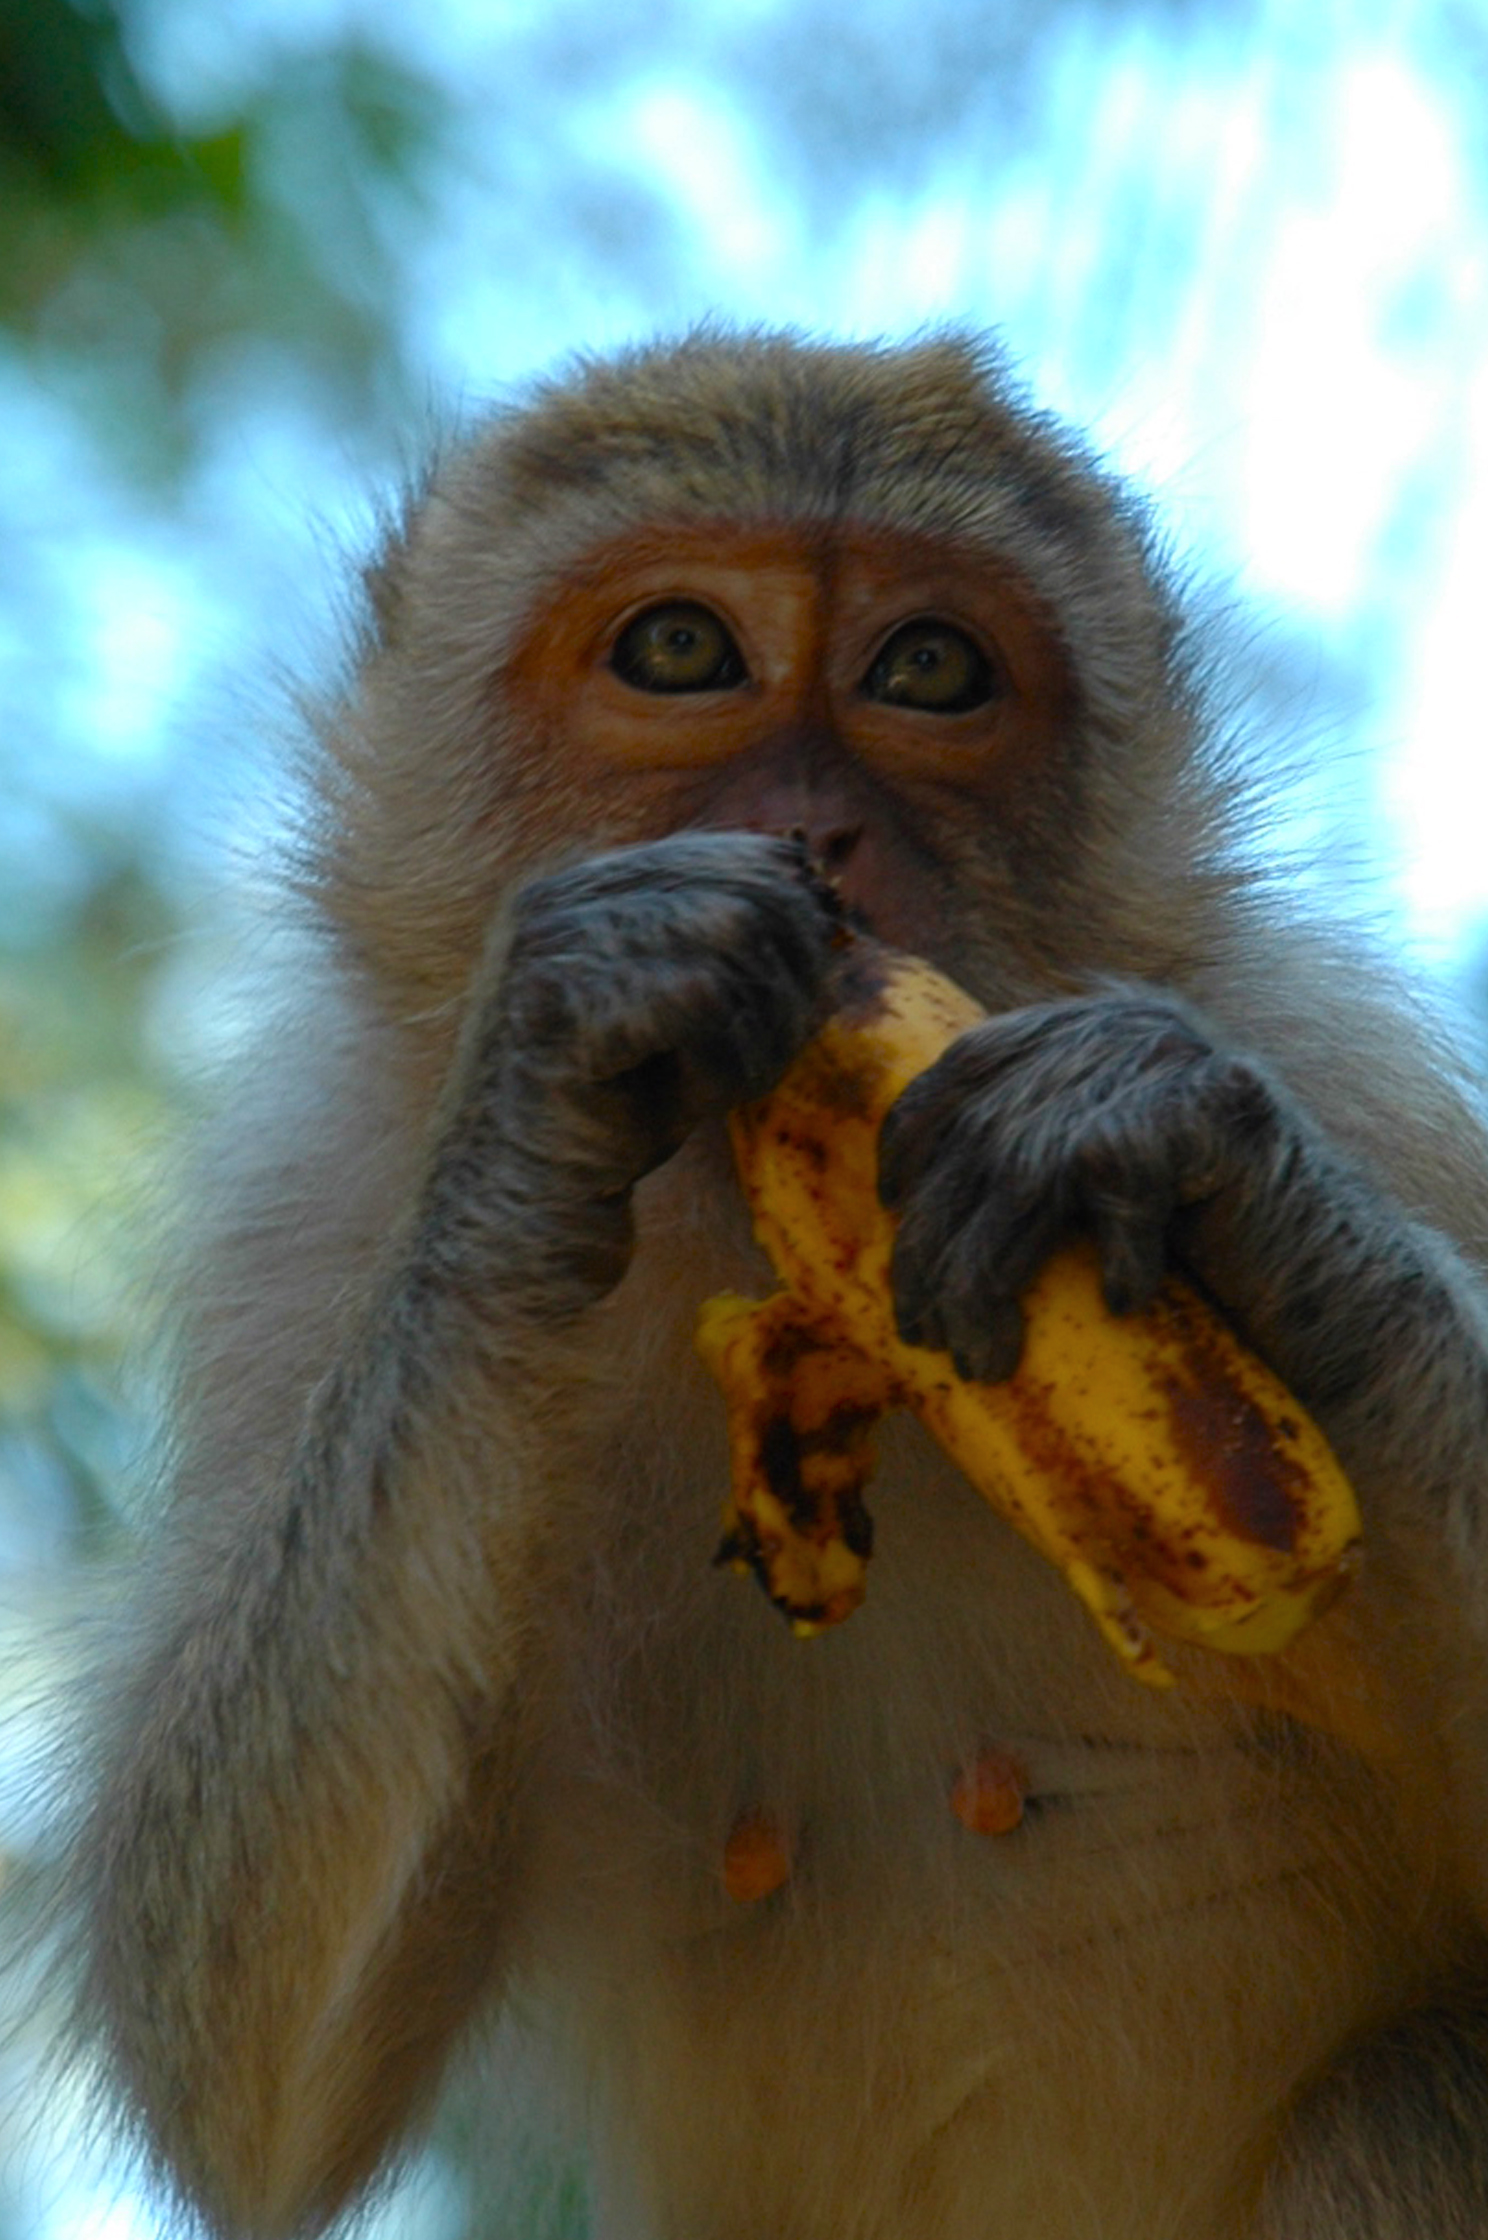 Monkey With Banana Wallpapers High Quality